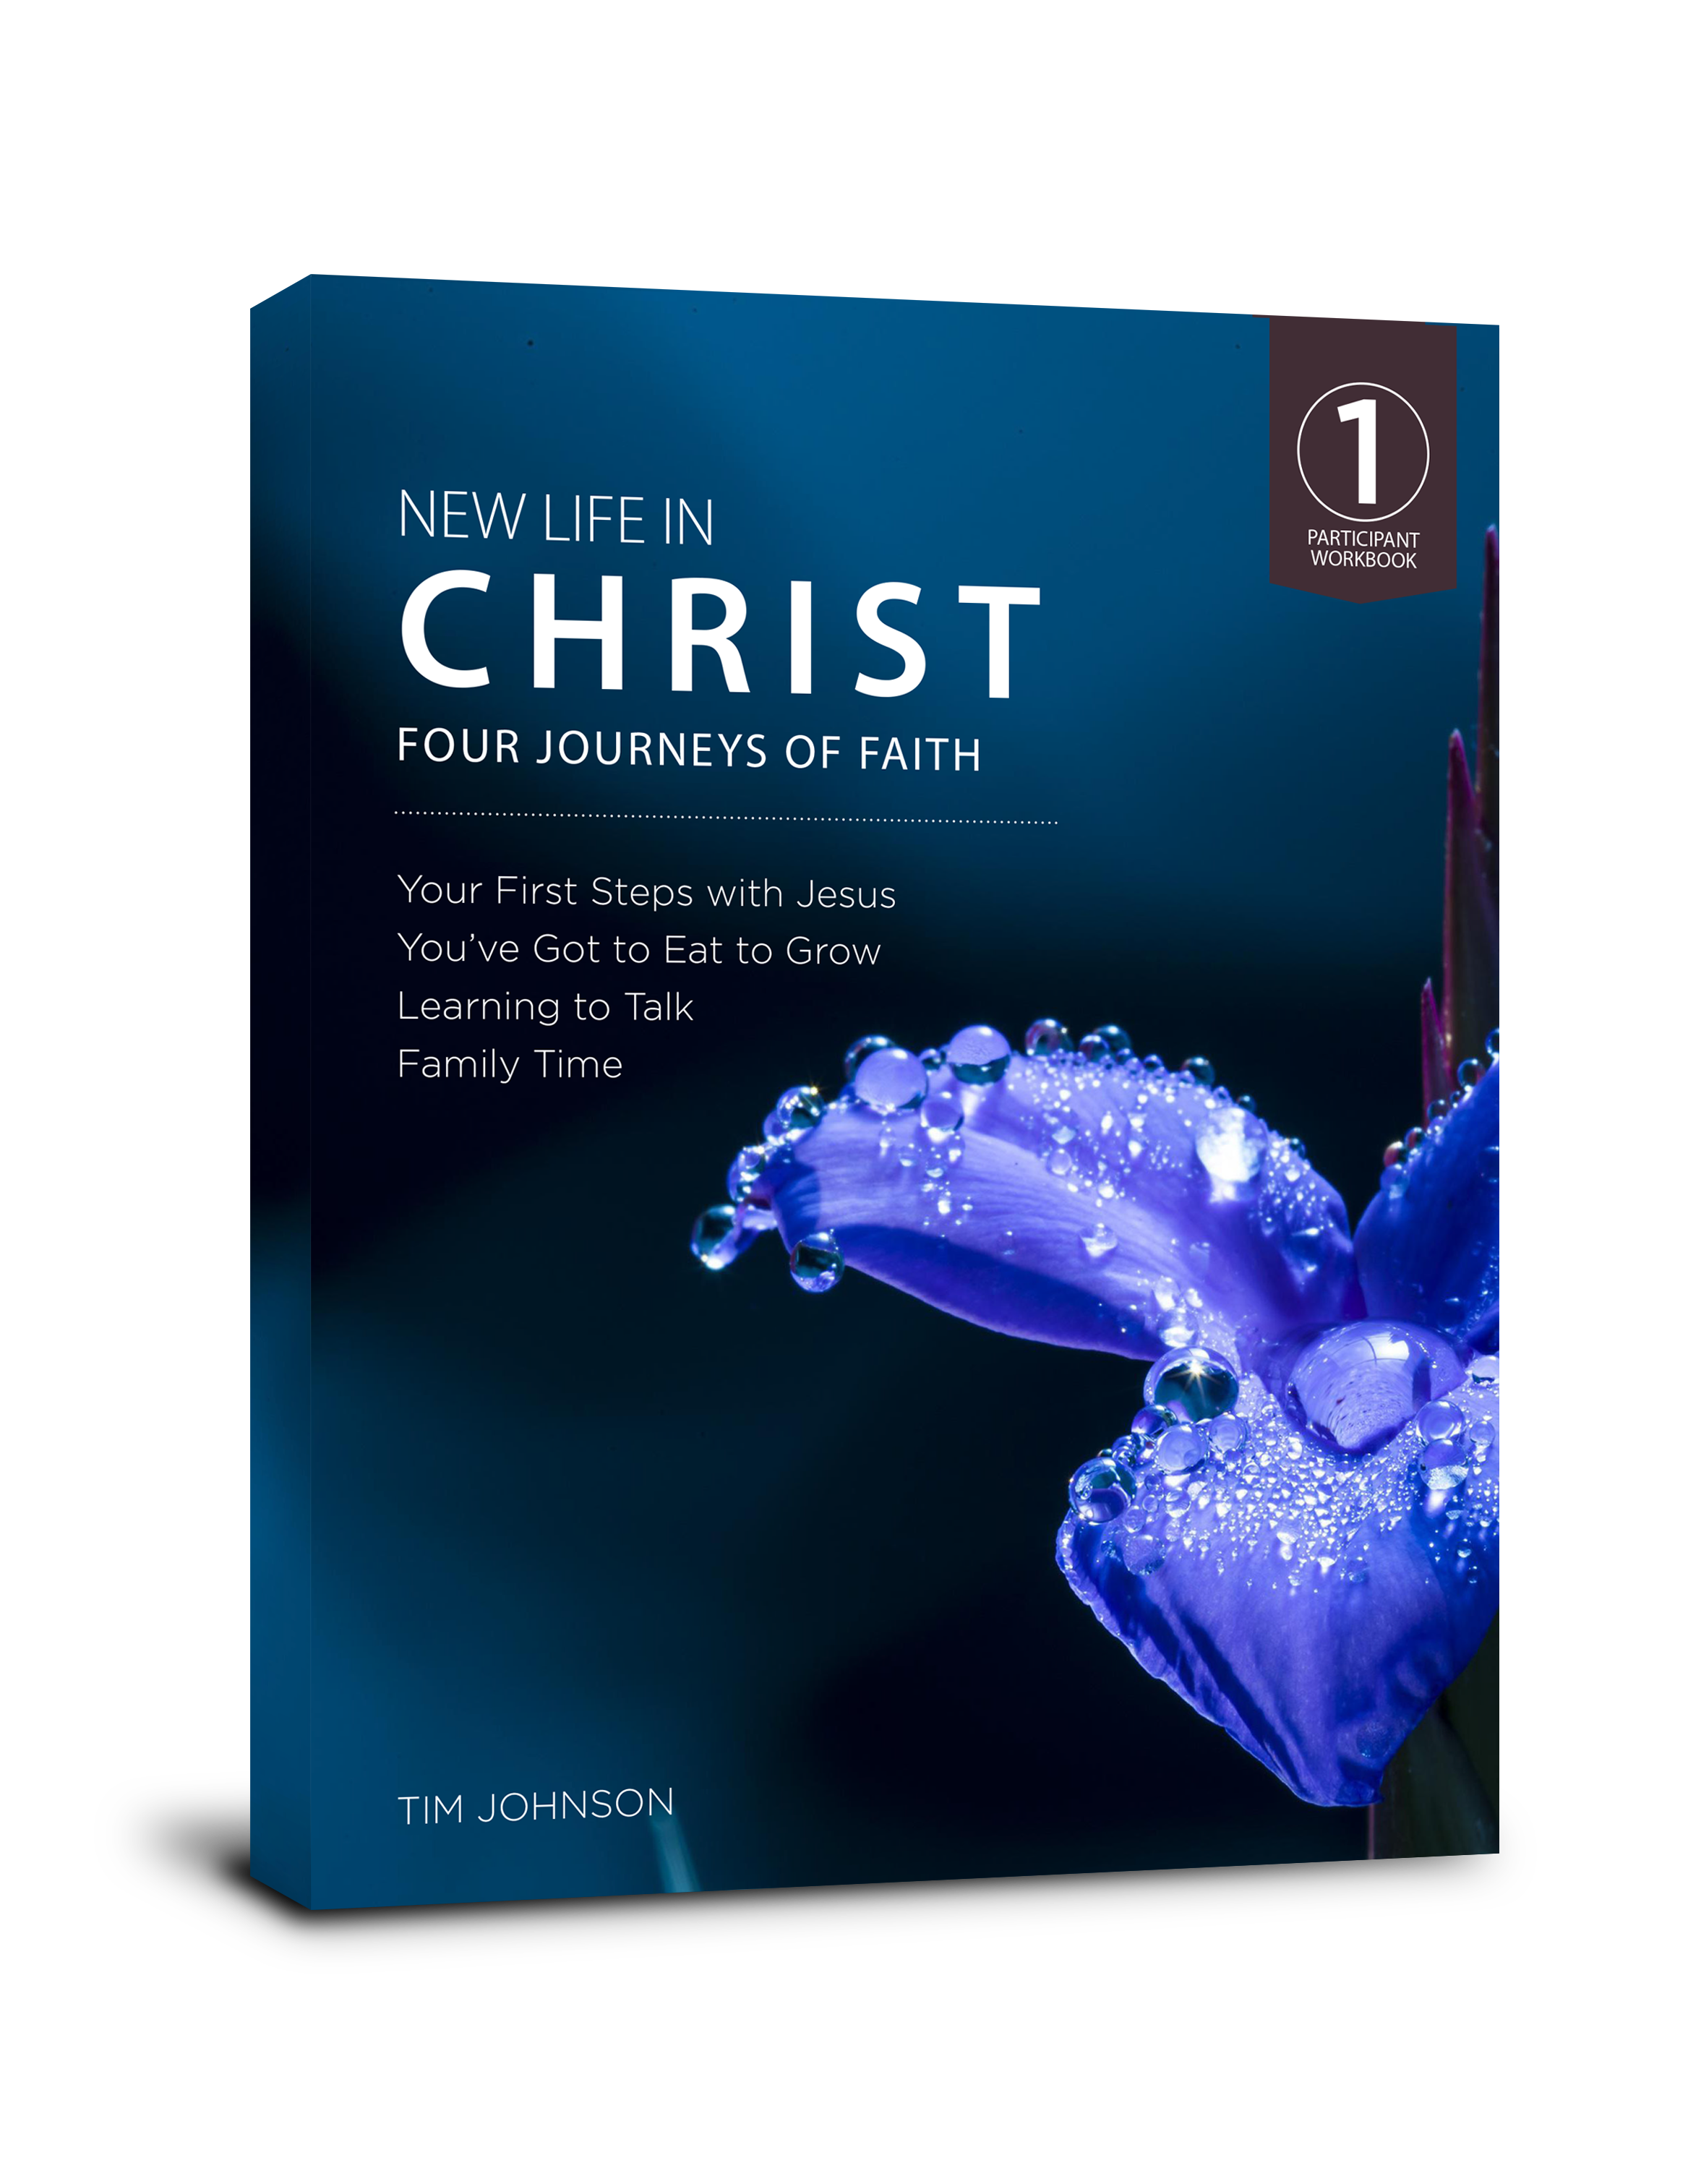 New Life in Christ Book Cover.png